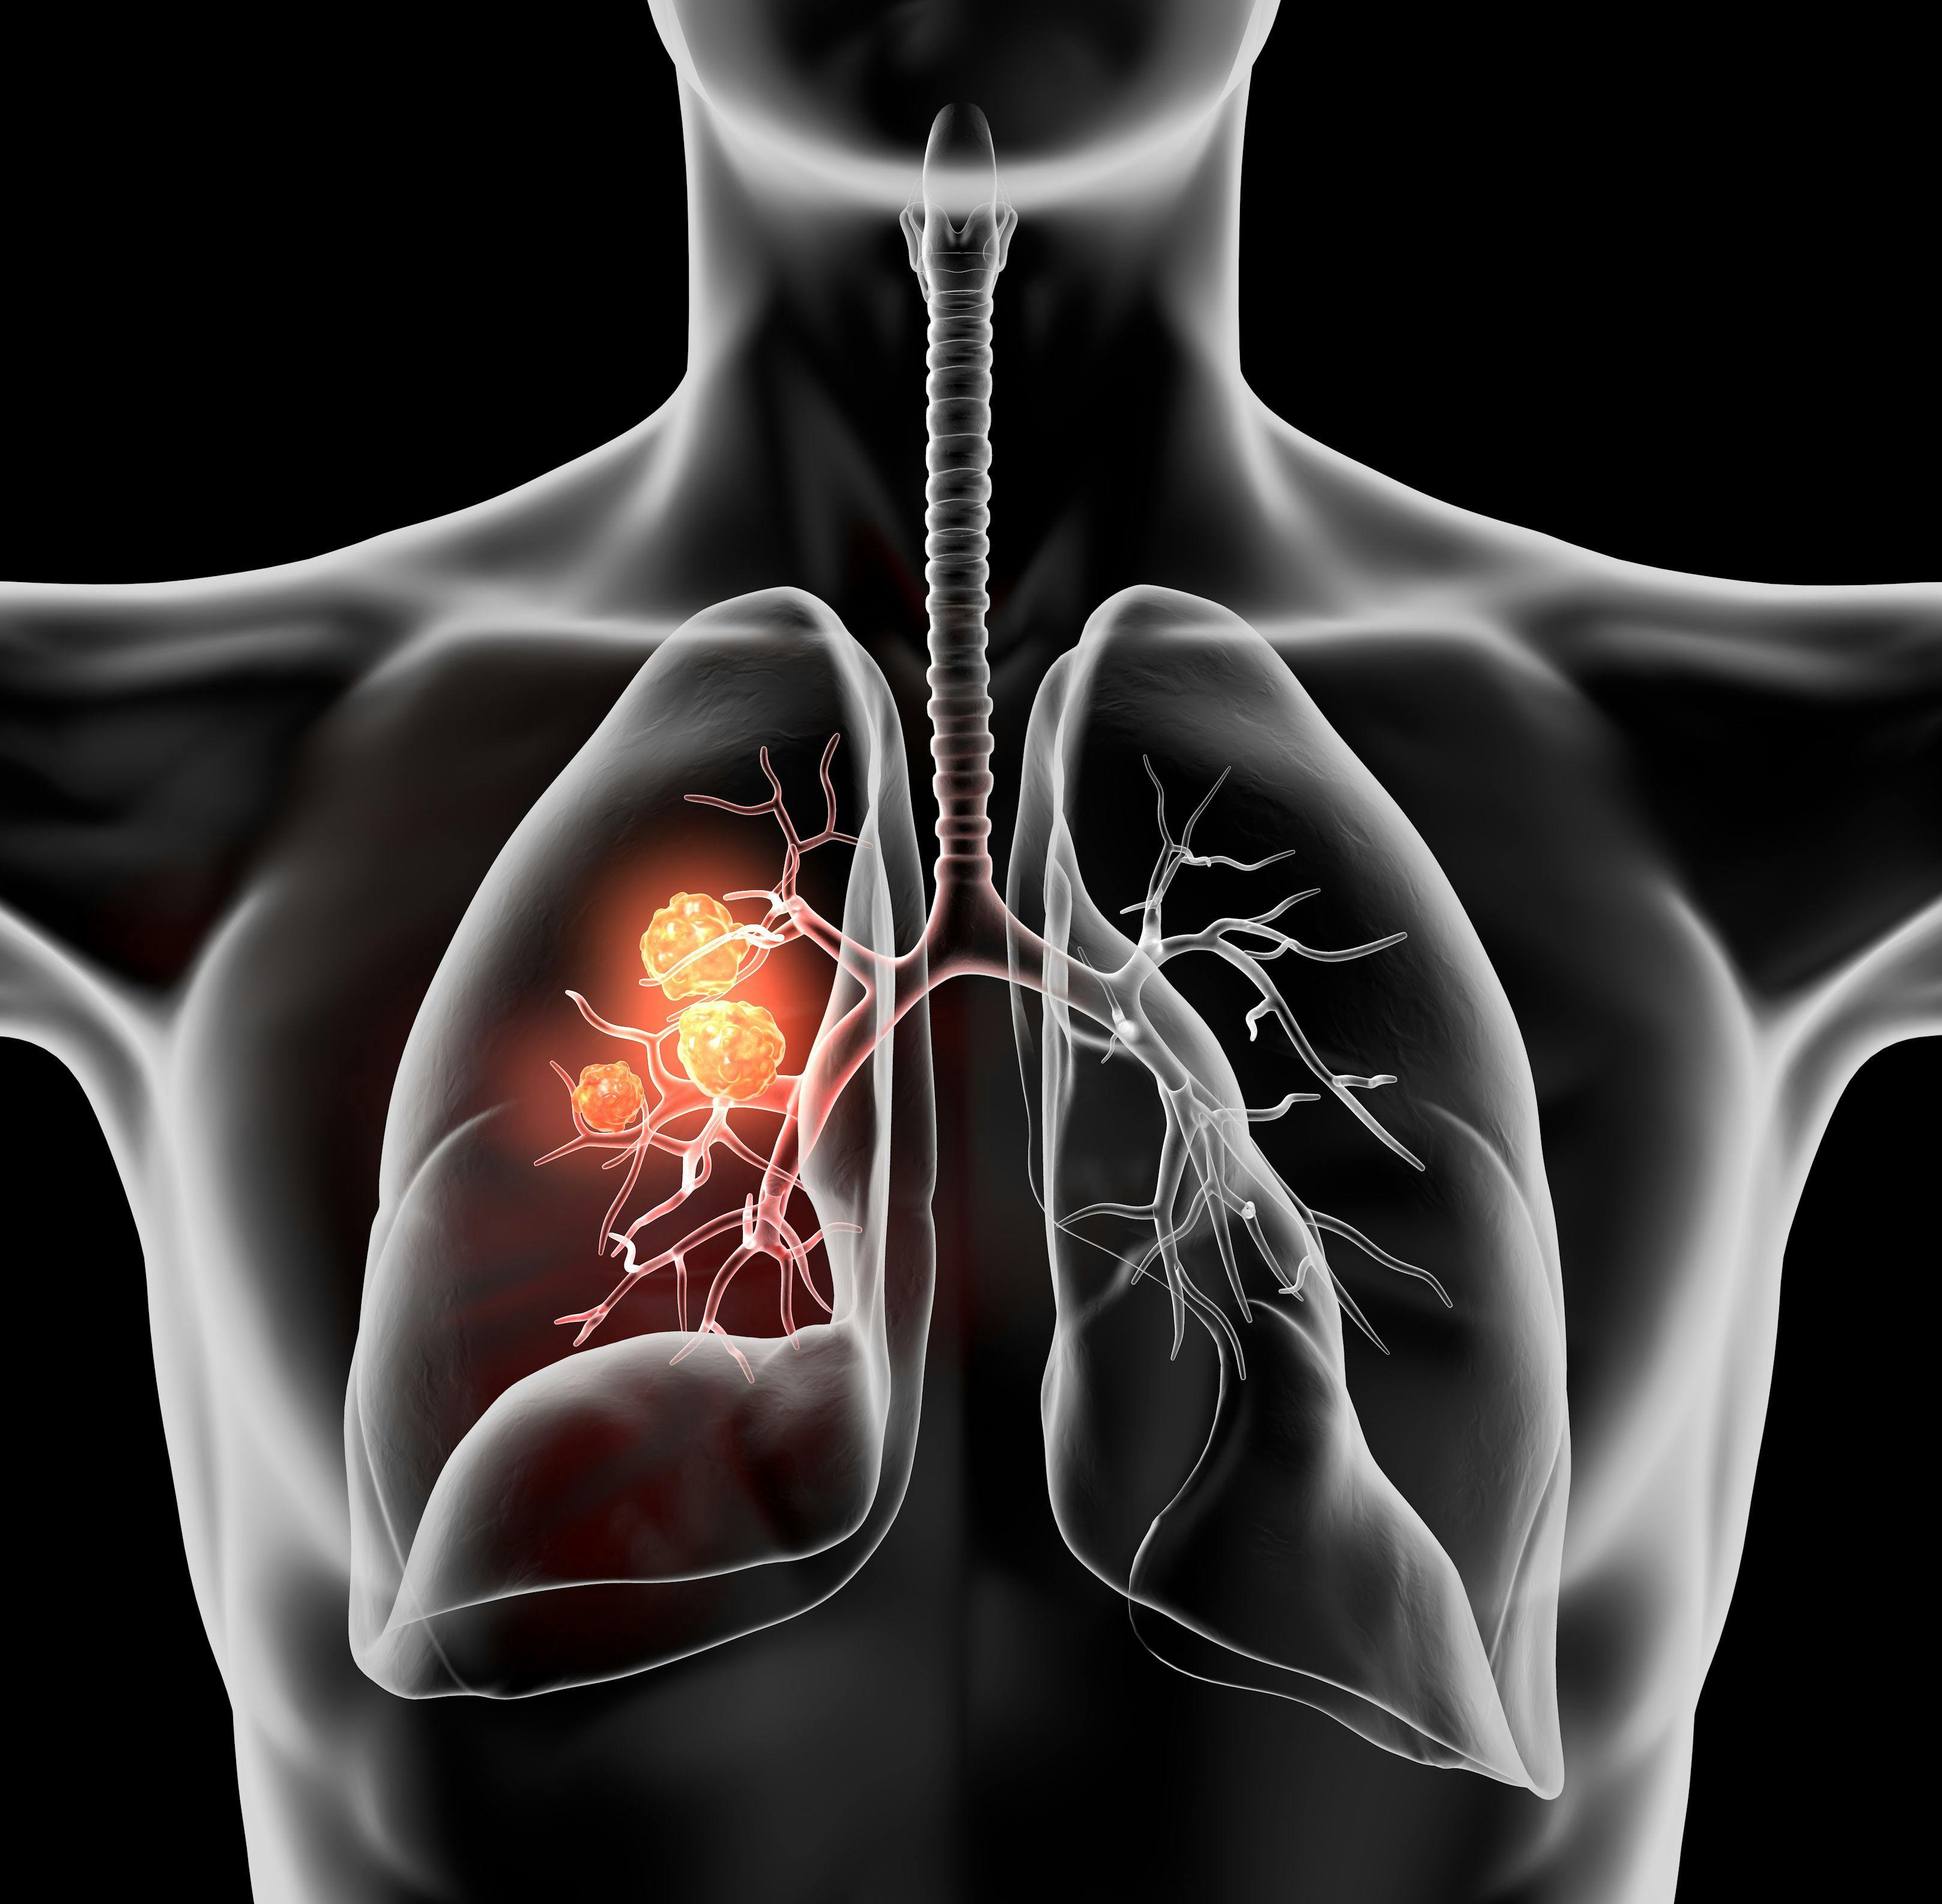 Expert Discusses PD-1 Inhibitors as Treatment of NSCLC